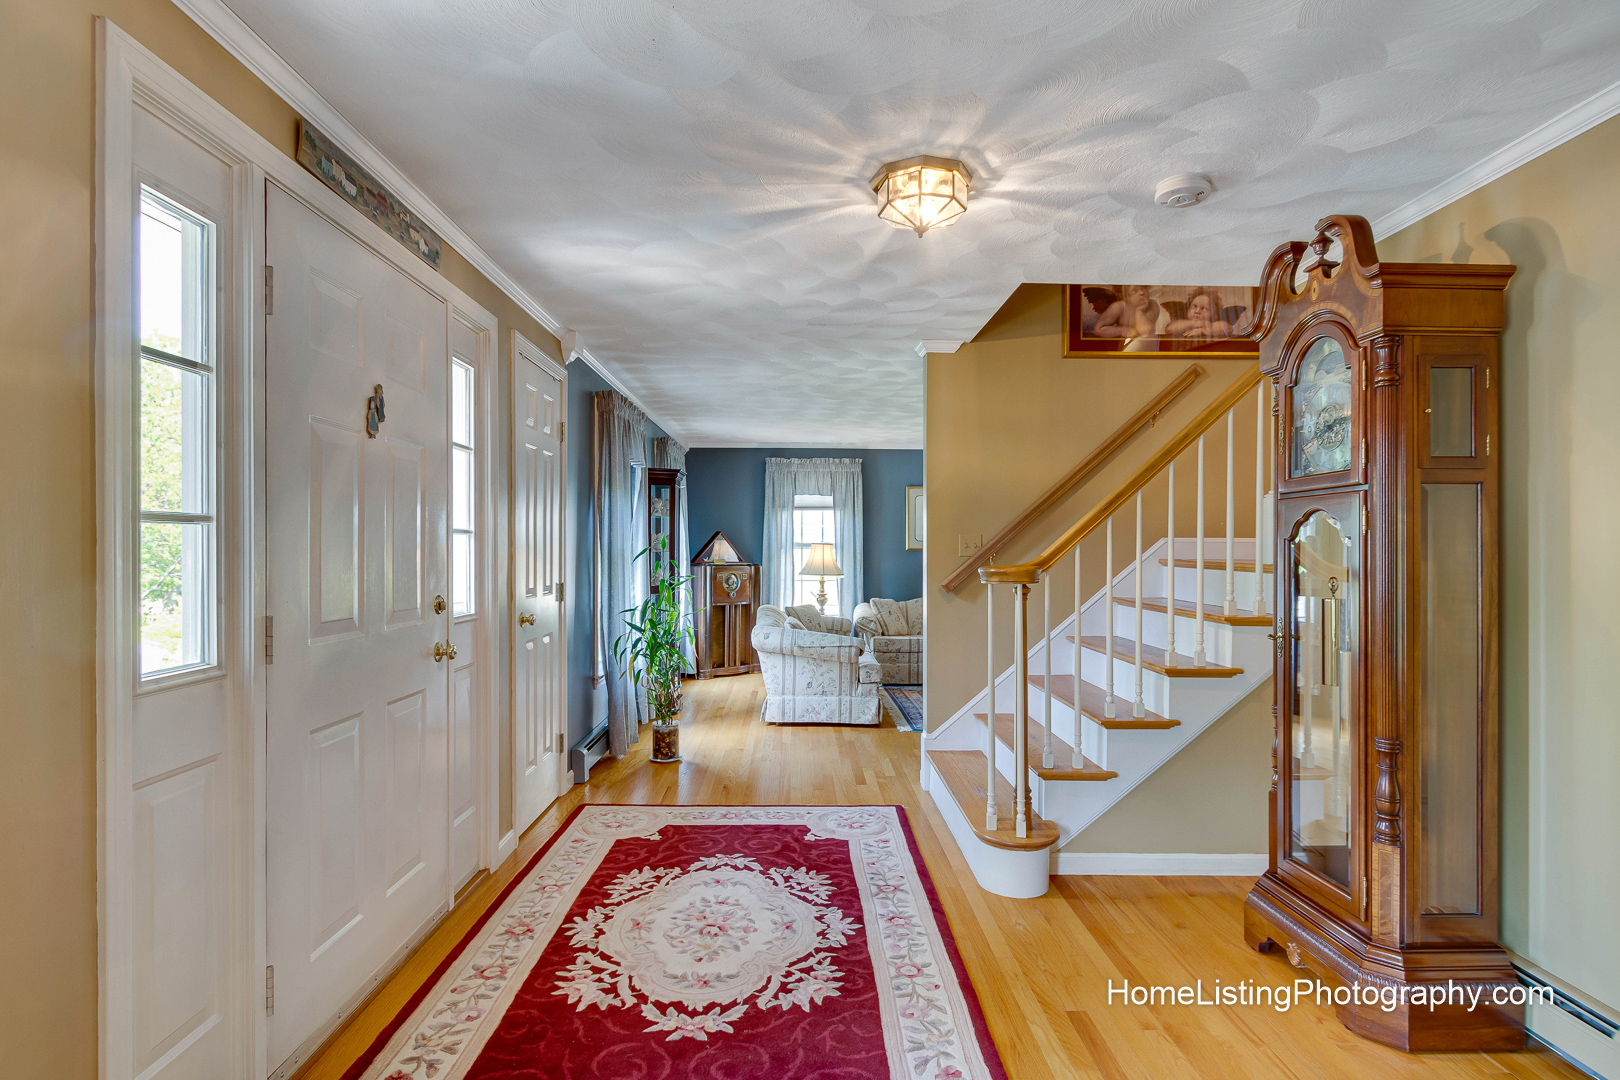 Thomas Adach - Woburn MA professional real estate photographer - 508-655-2225 Home Listing Photography